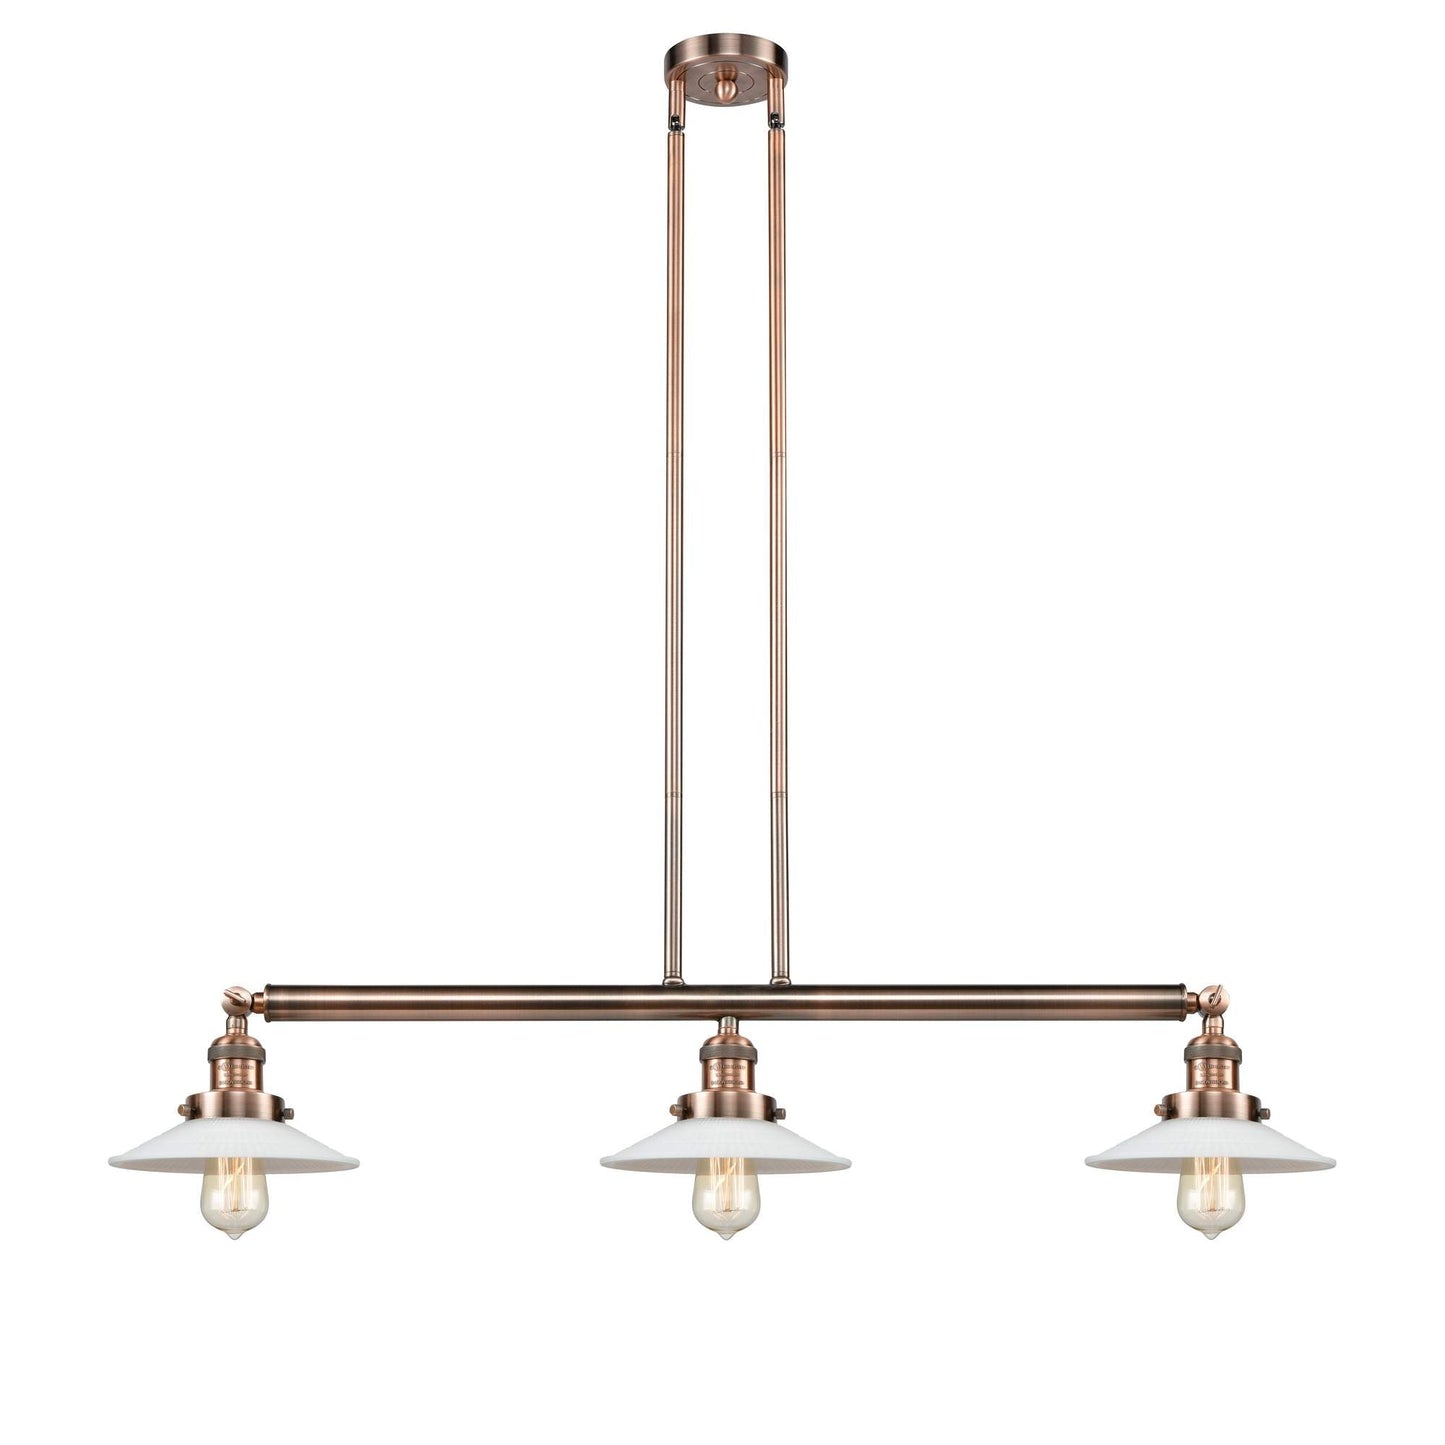 213-AC-G1 3-Light 41" Antique Copper Island Light - White Halophane Glass - LED Bulb - Dimmensions: 41 x 8.5 x 8<br>Minimum Height : 16.25<br>Maximum Height : 40.25 - Sloped Ceiling Compatible: Yes